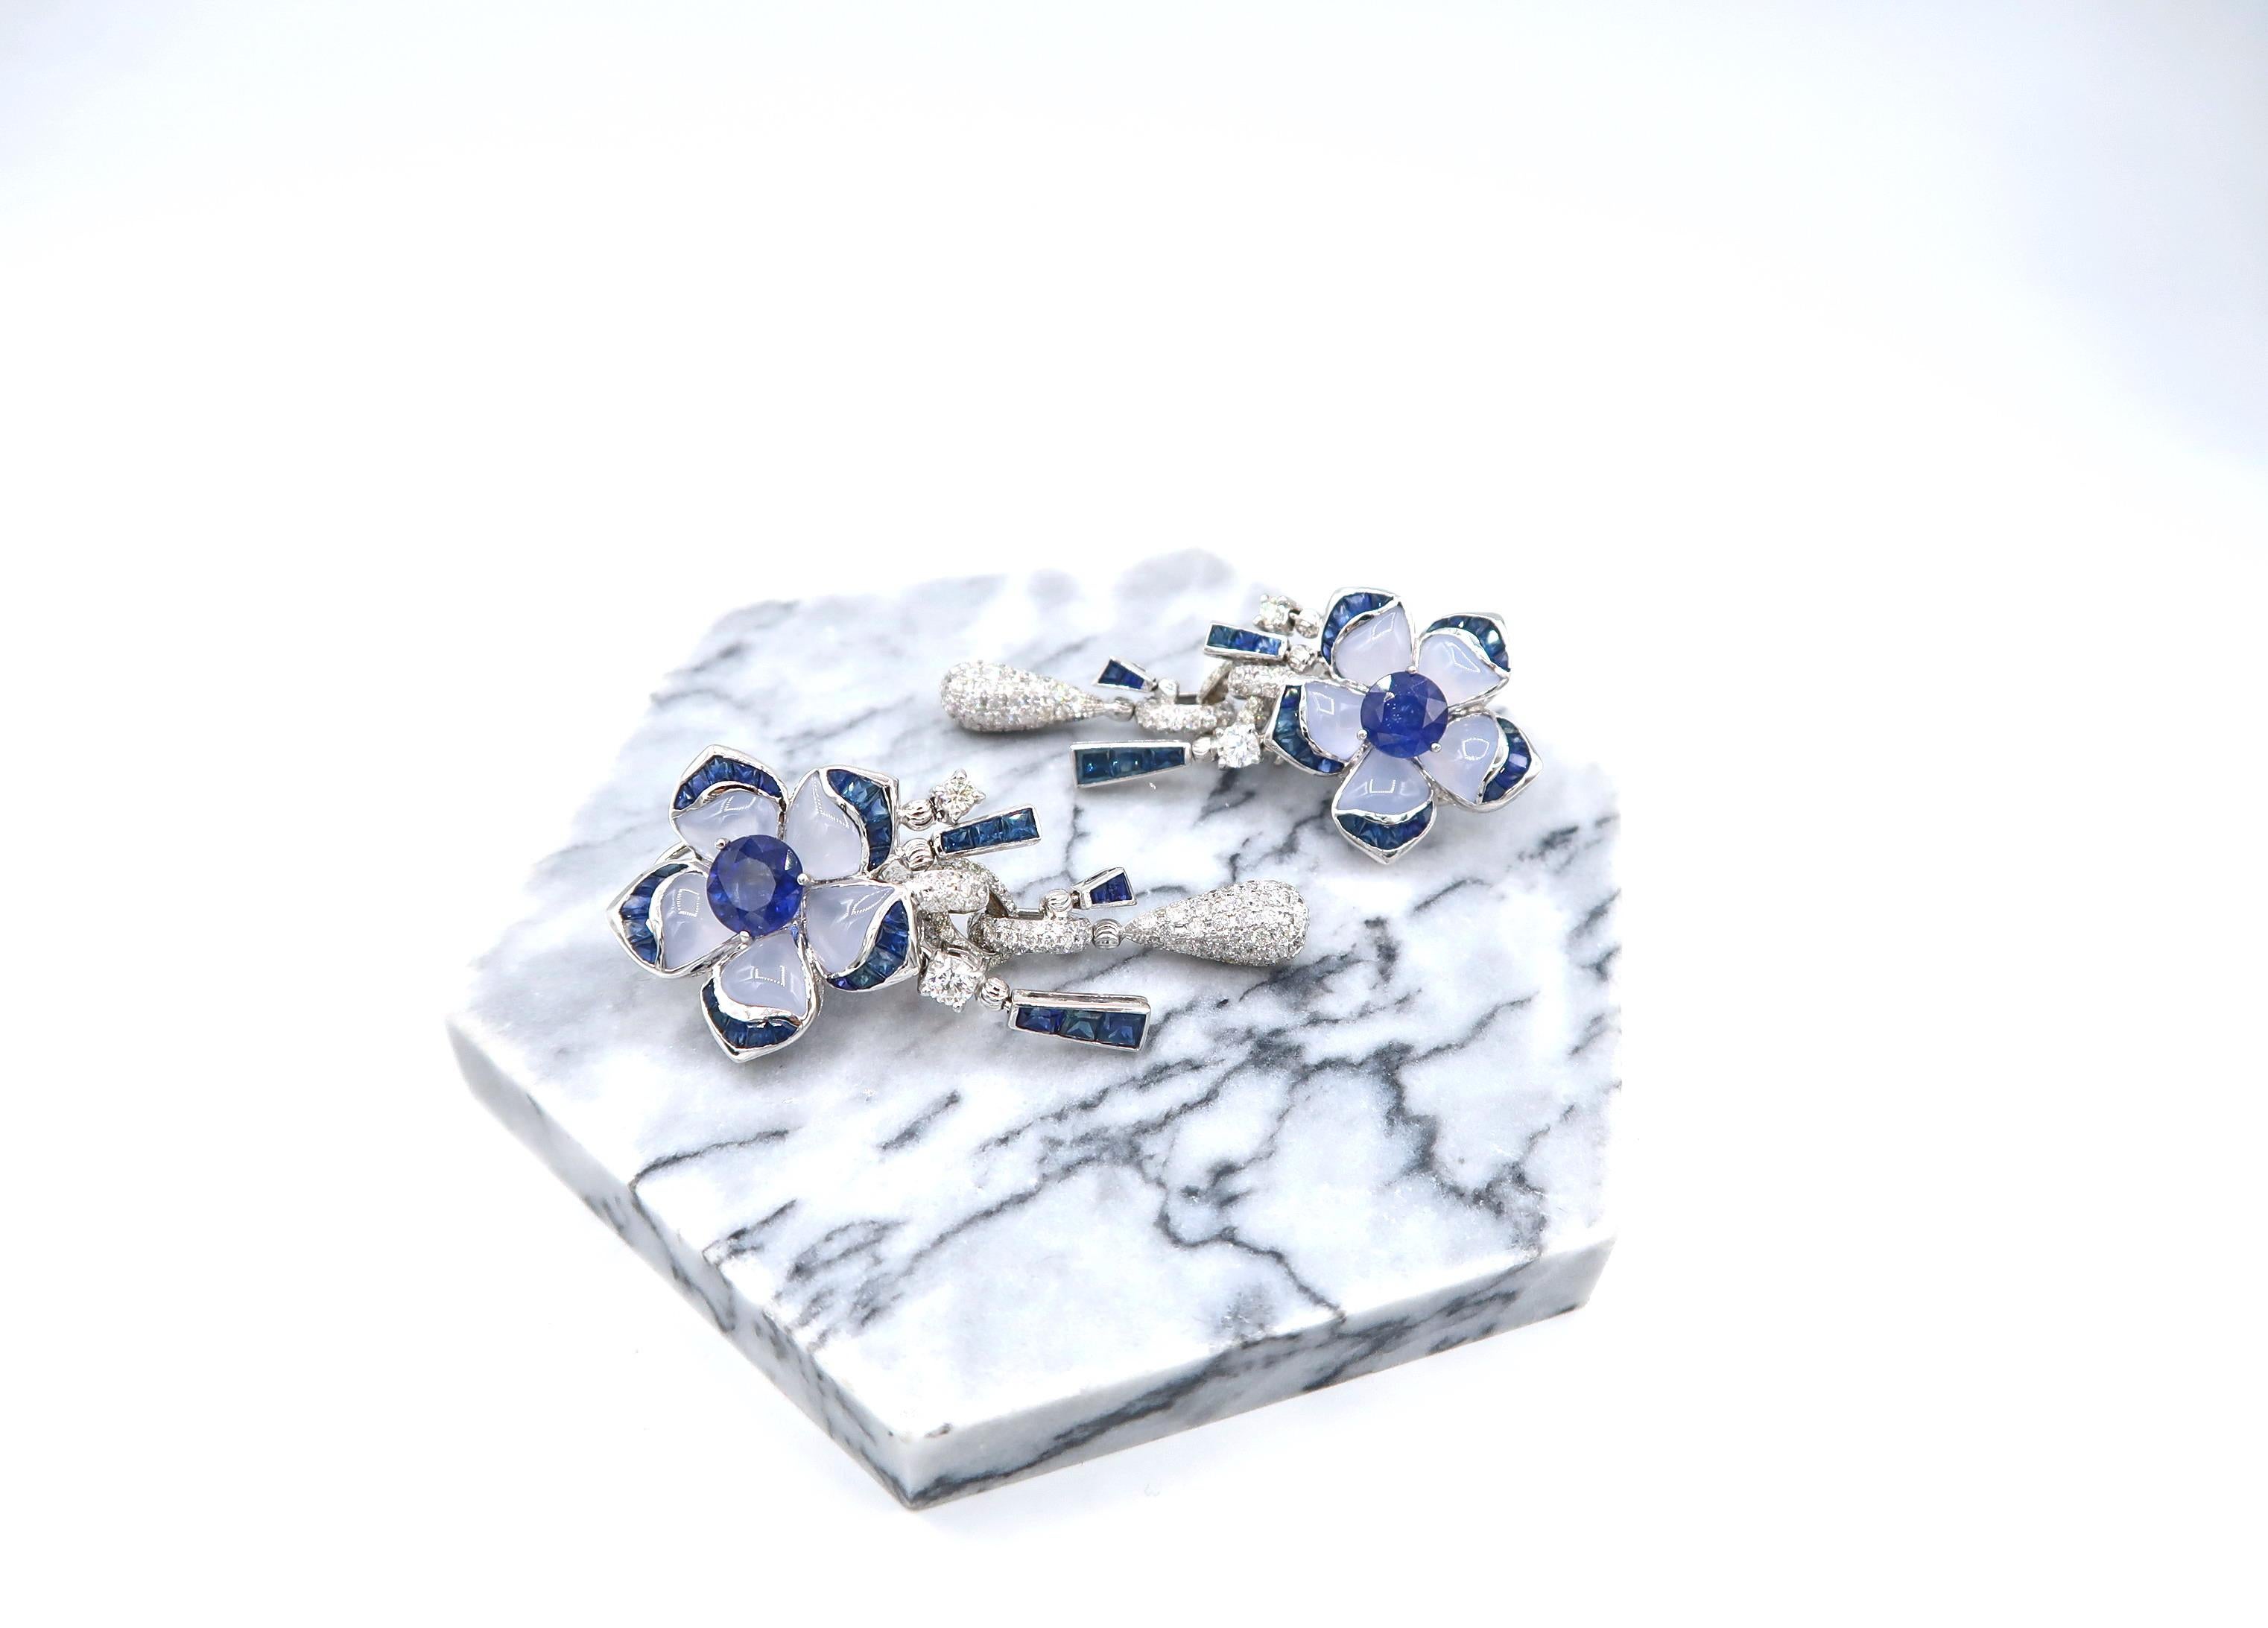 Sapphire Flower Drop Earrings in 18K White Gold with Chalcedony Petals and Sapphire and Diamond Embellishments

Gold: 18K White Gold 28.68g.
Sapphire: 9ct.
Chalcedony: 8.16ct.
Diamond: 3.12ct.